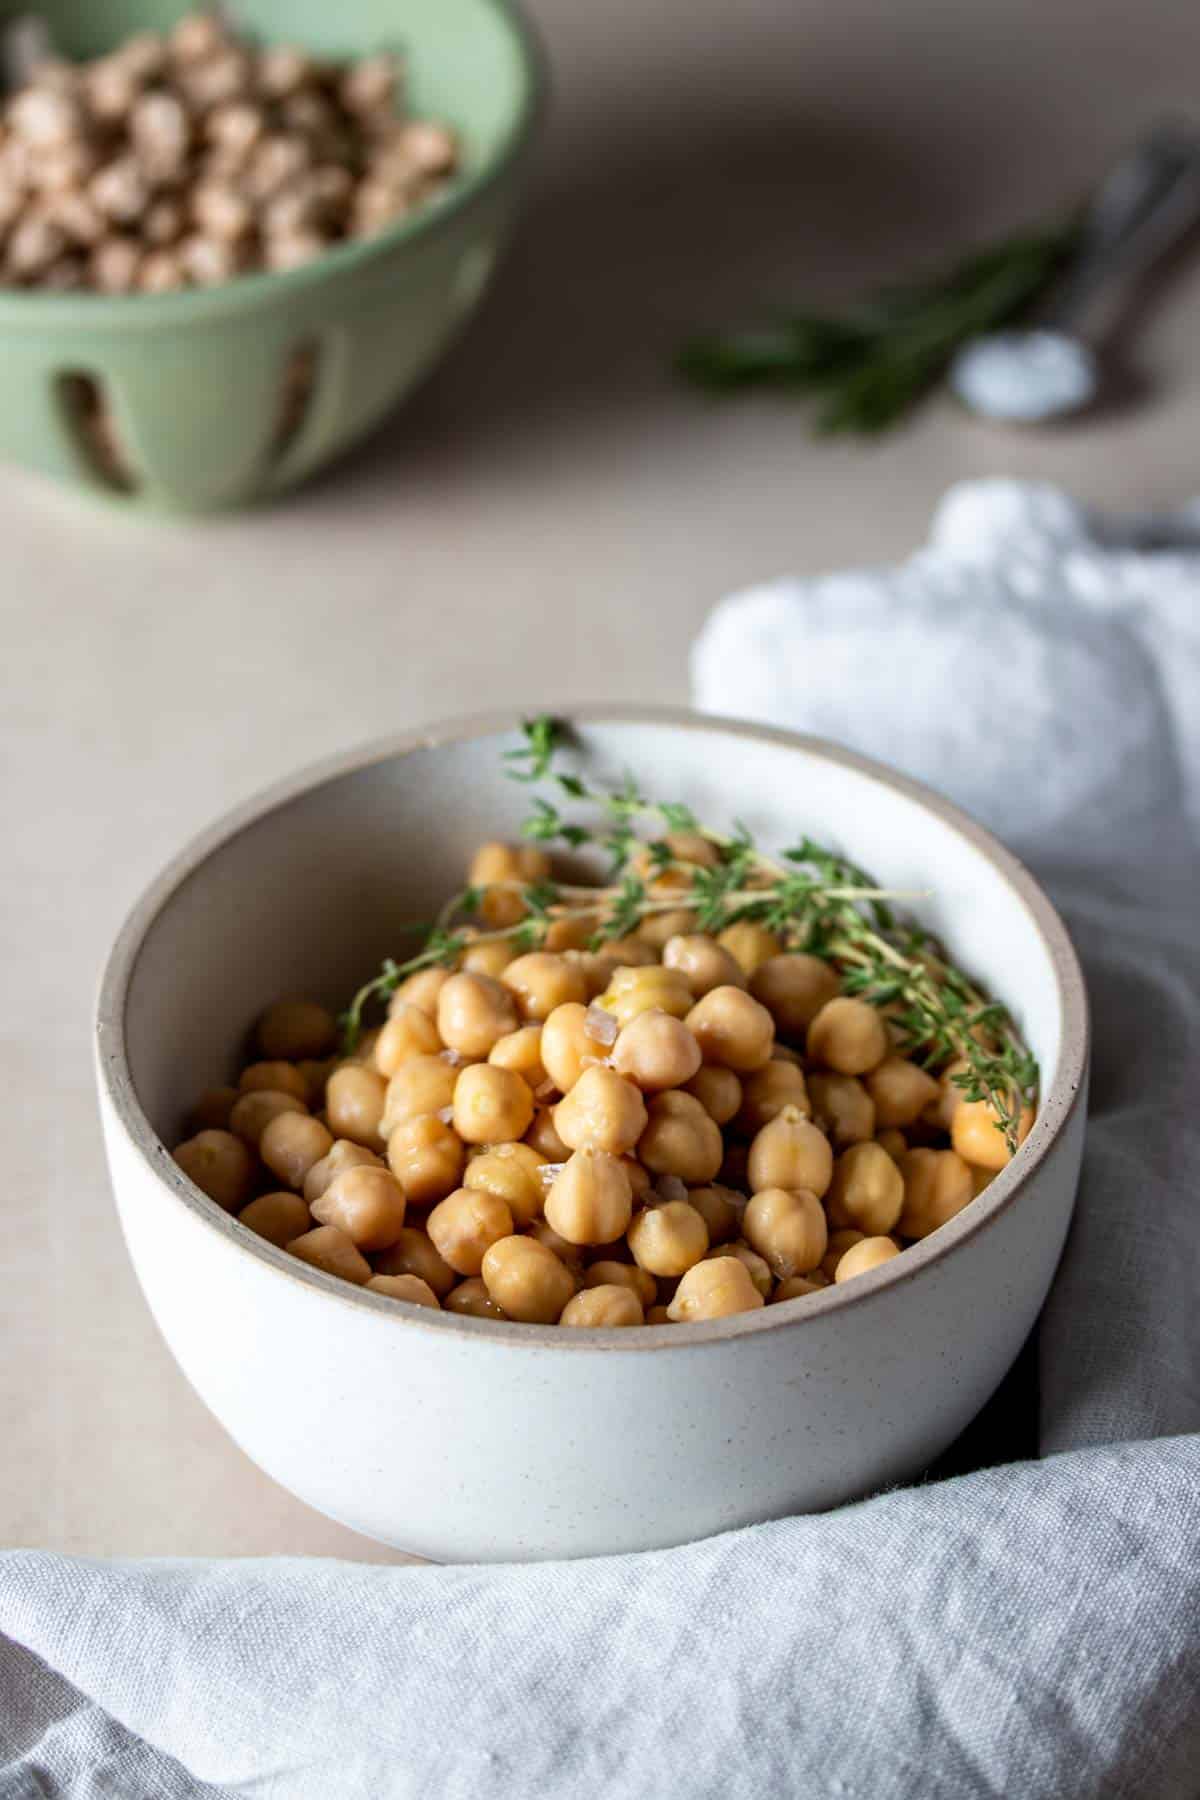 Cooked chickpeas in a white bowl with tan rim and sprigs of thyme with a green strainer in the background.